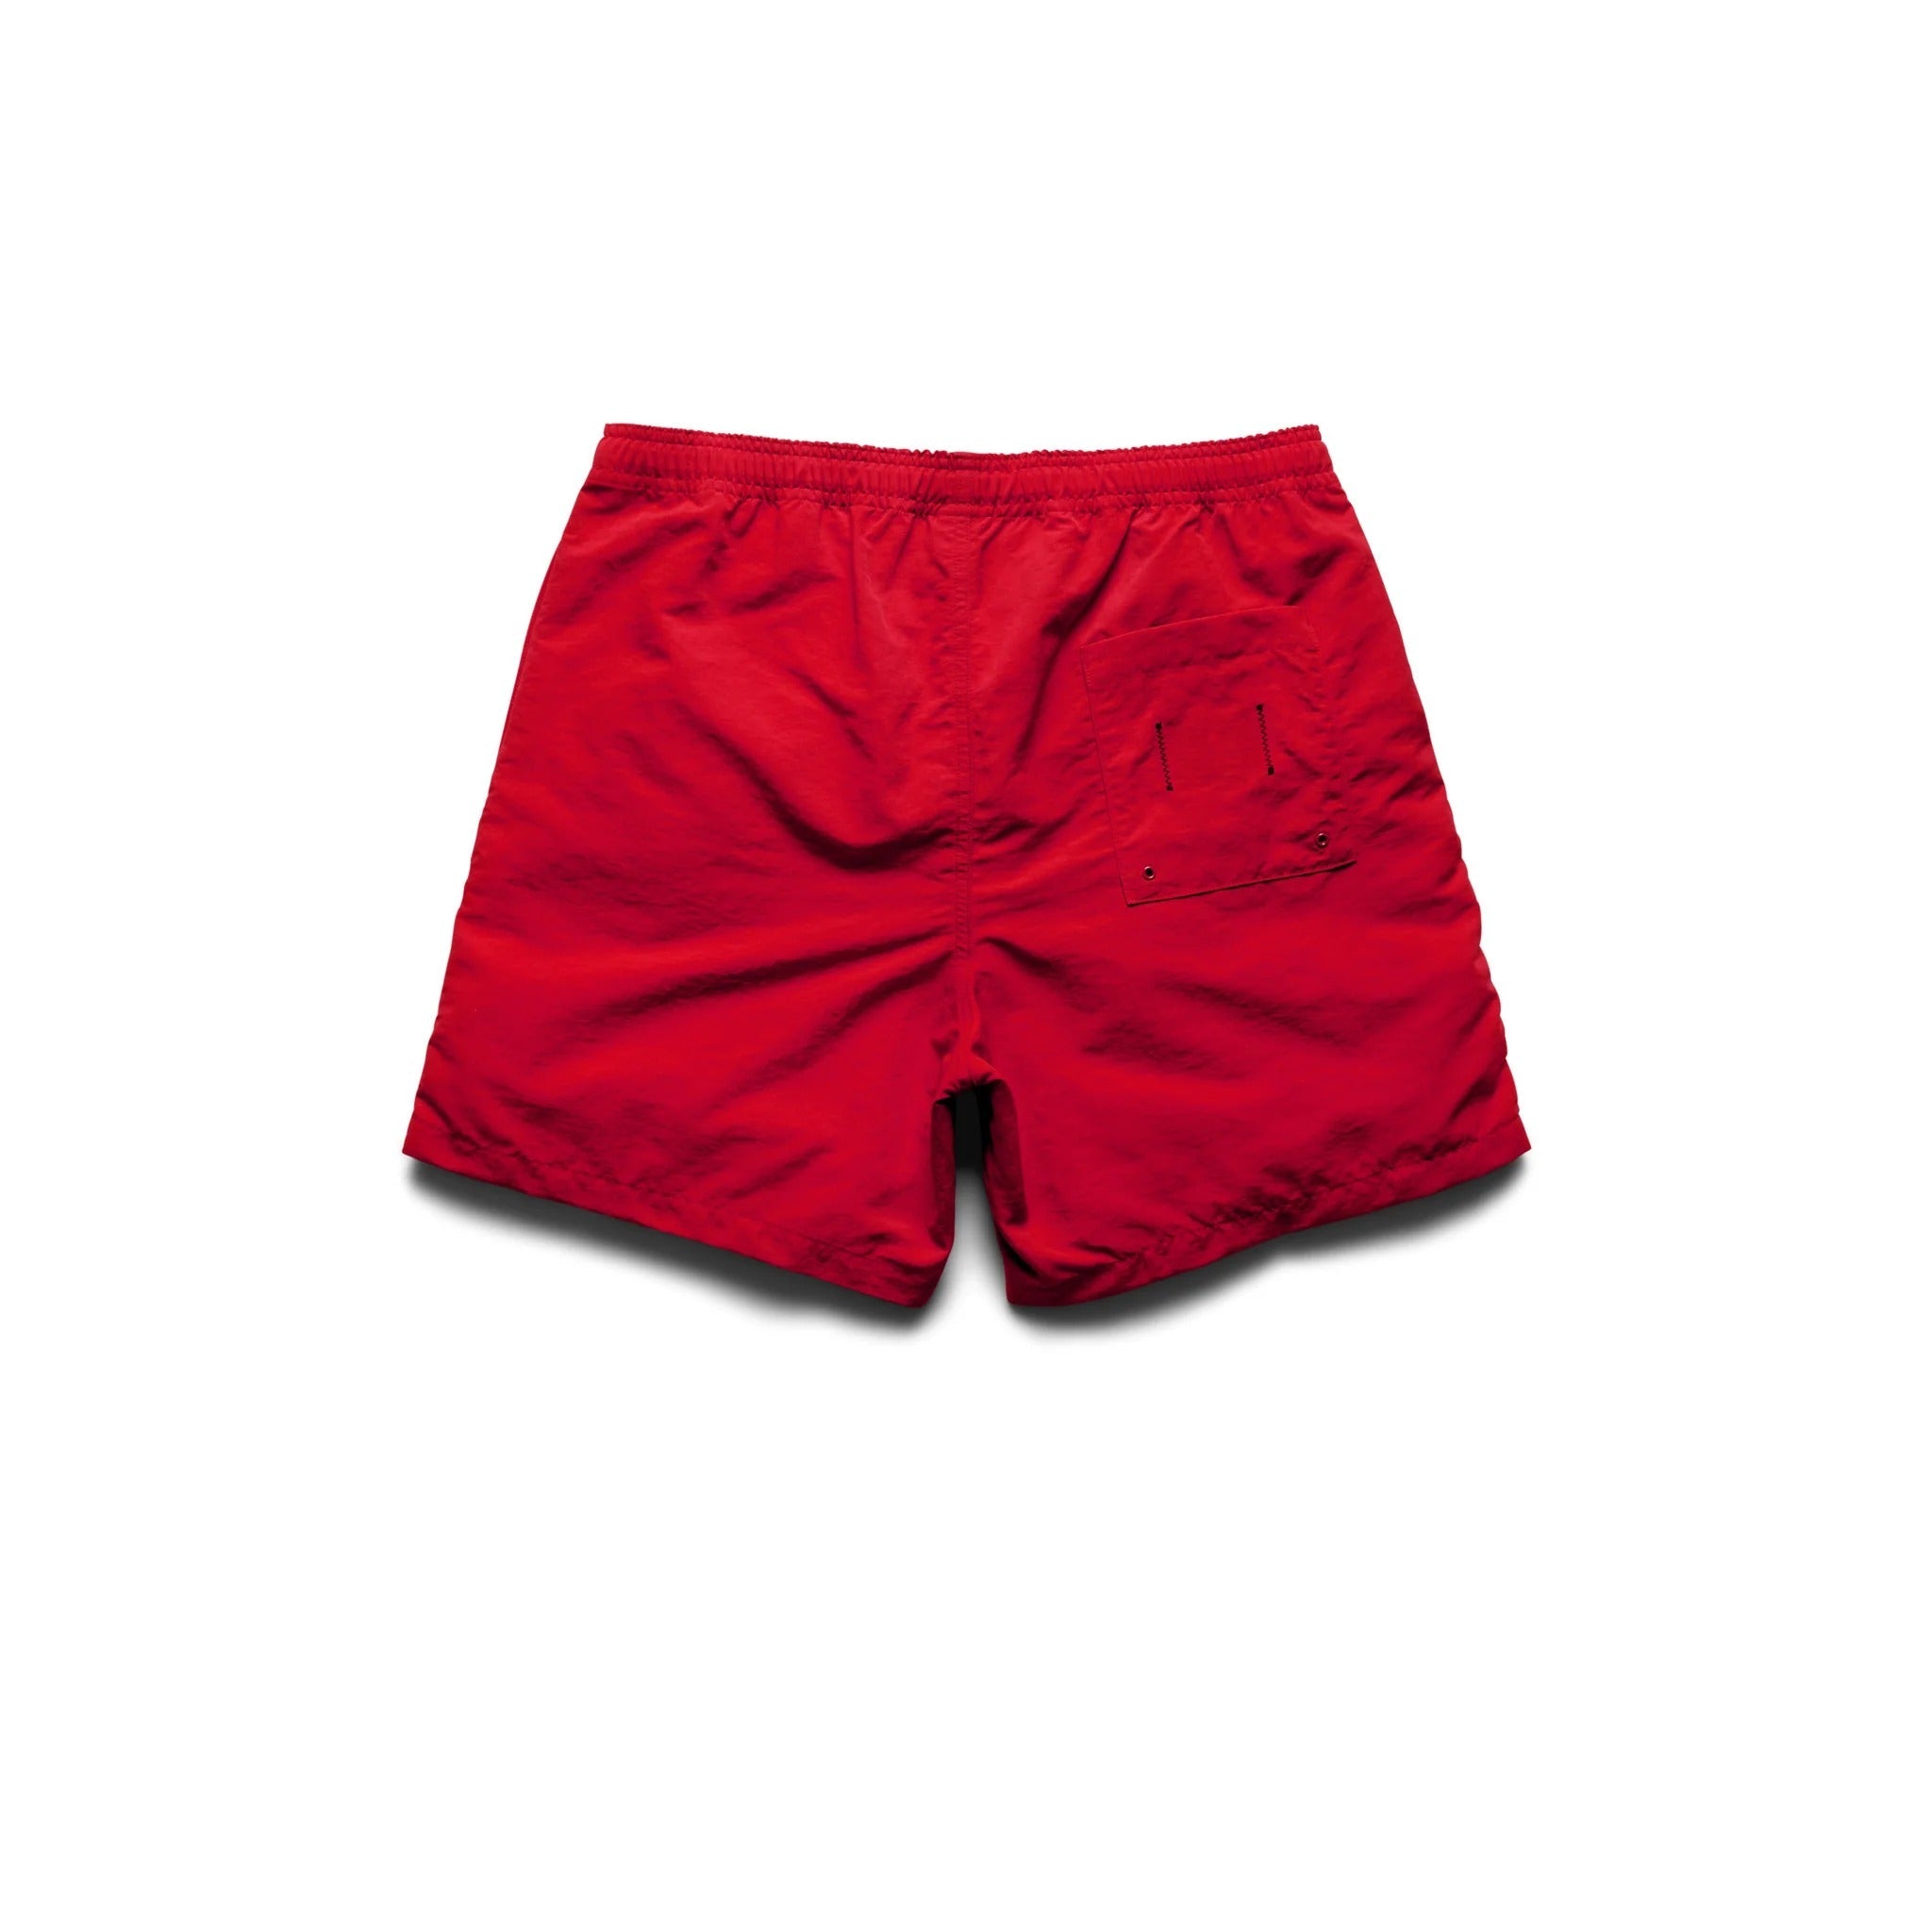 Go to NEW ARRIVALS - SHORTS - Canada